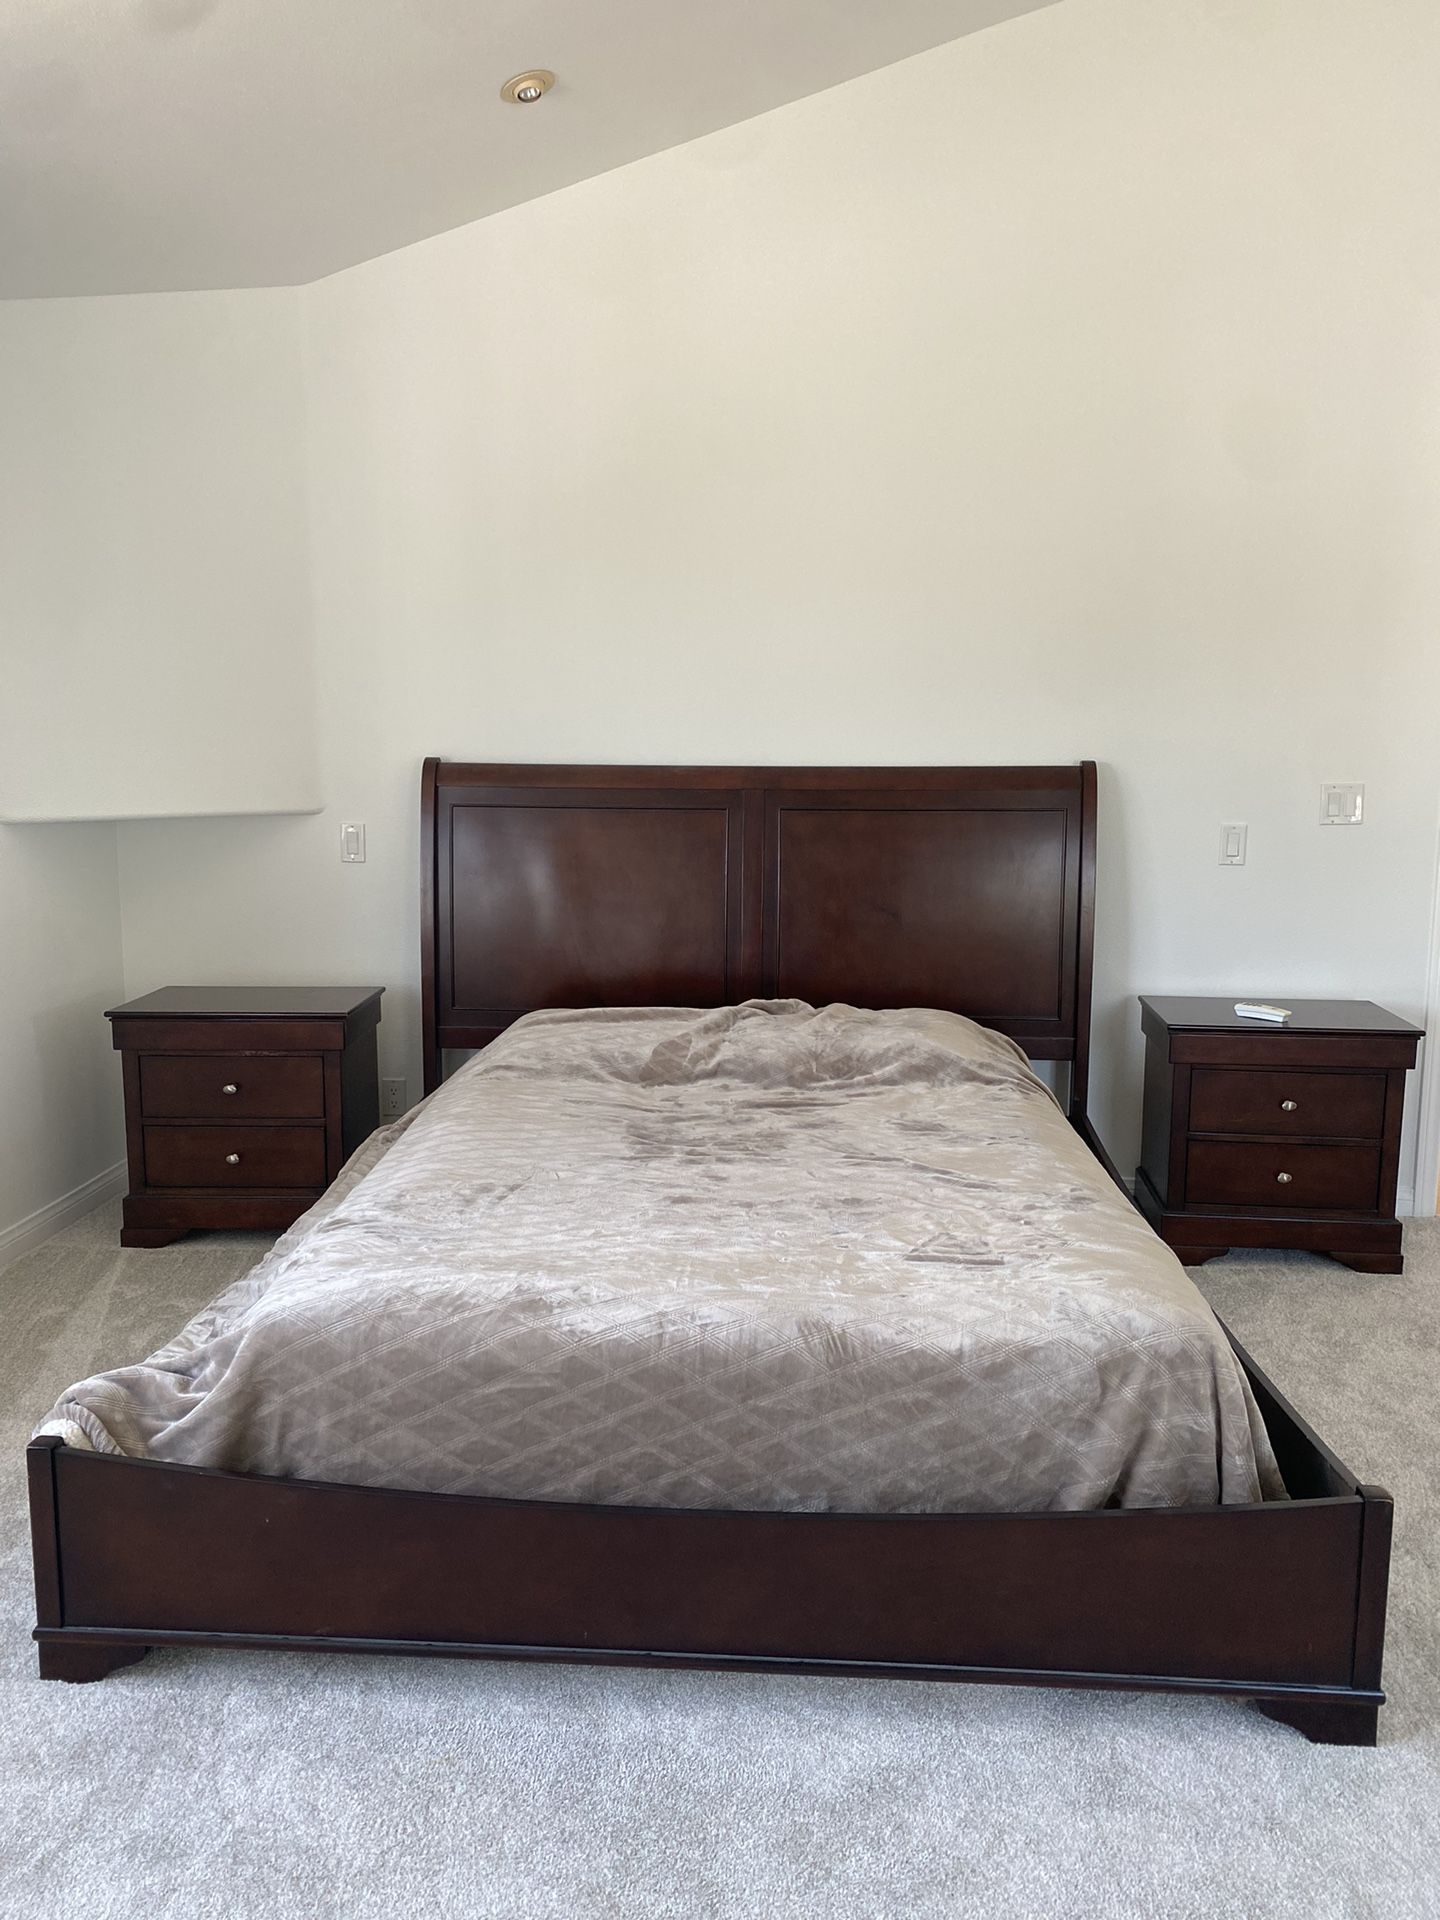 Wooden Queen Bed Set w/ Two Nightstands And Matching Dresser w/ Mirror